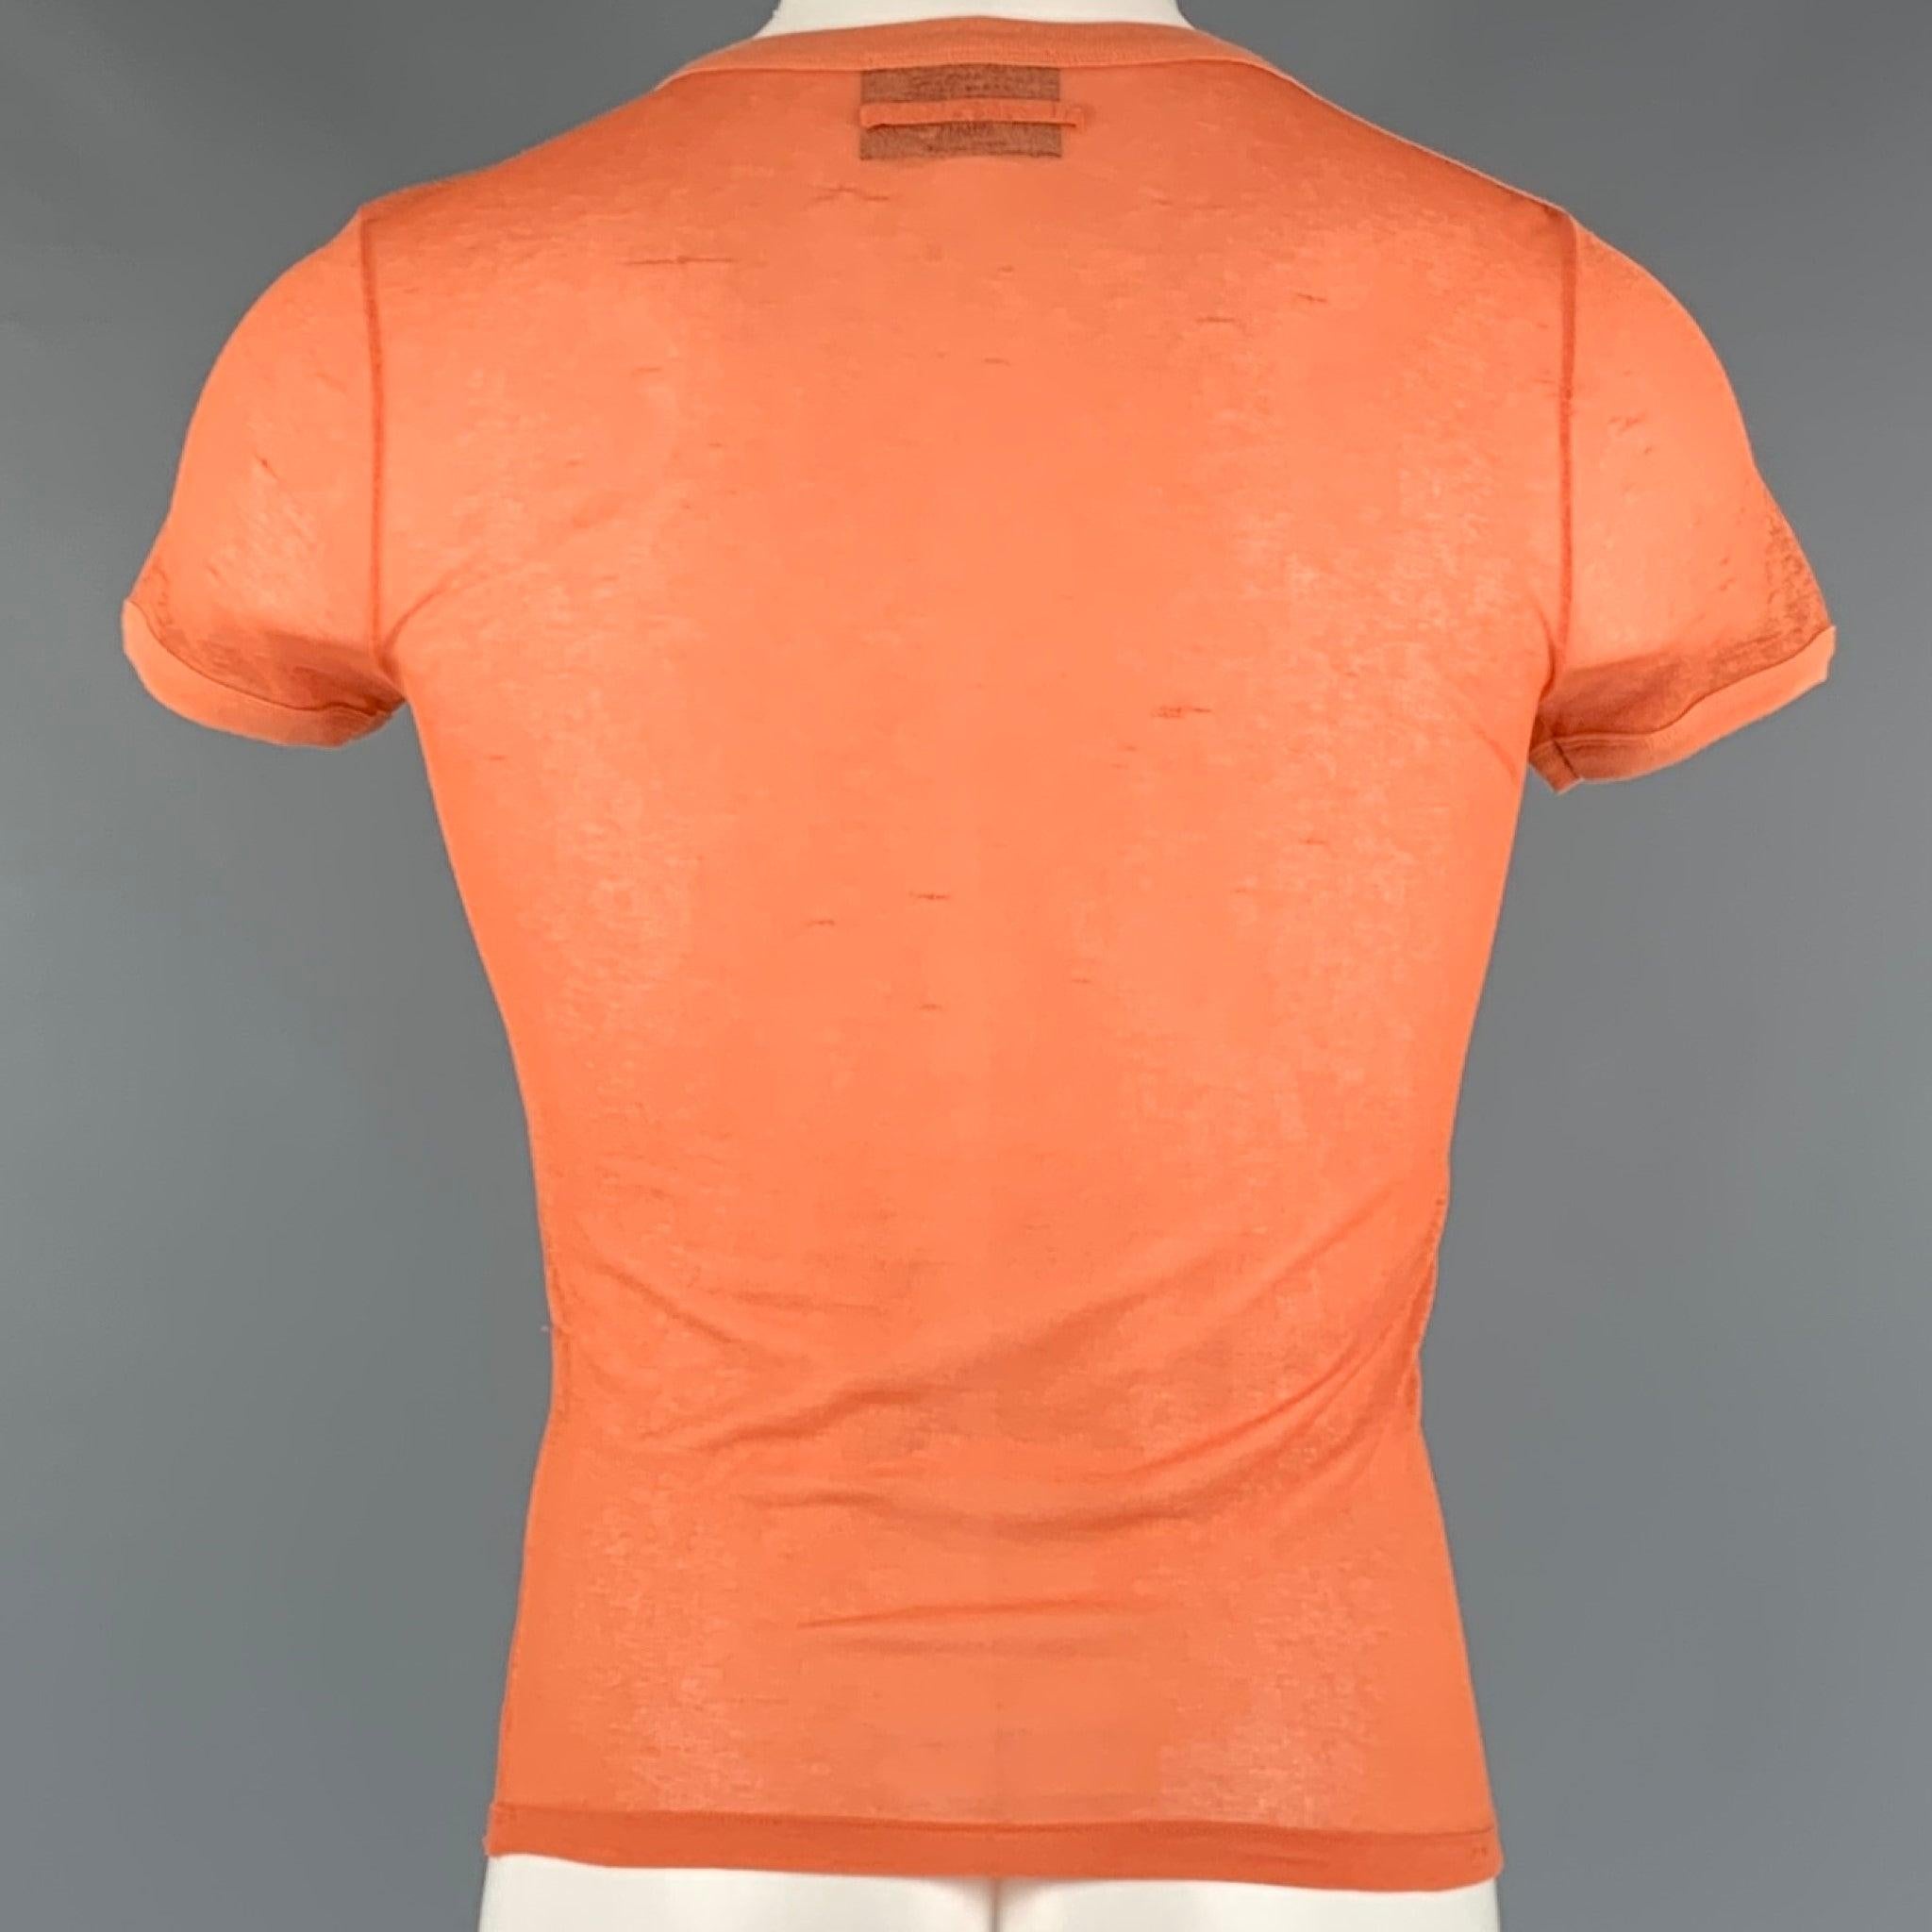 JEAN PAUL GAULTIER Size M Orange Polyester Short Sleeve T-shirt In Good Condition For Sale In San Francisco, CA